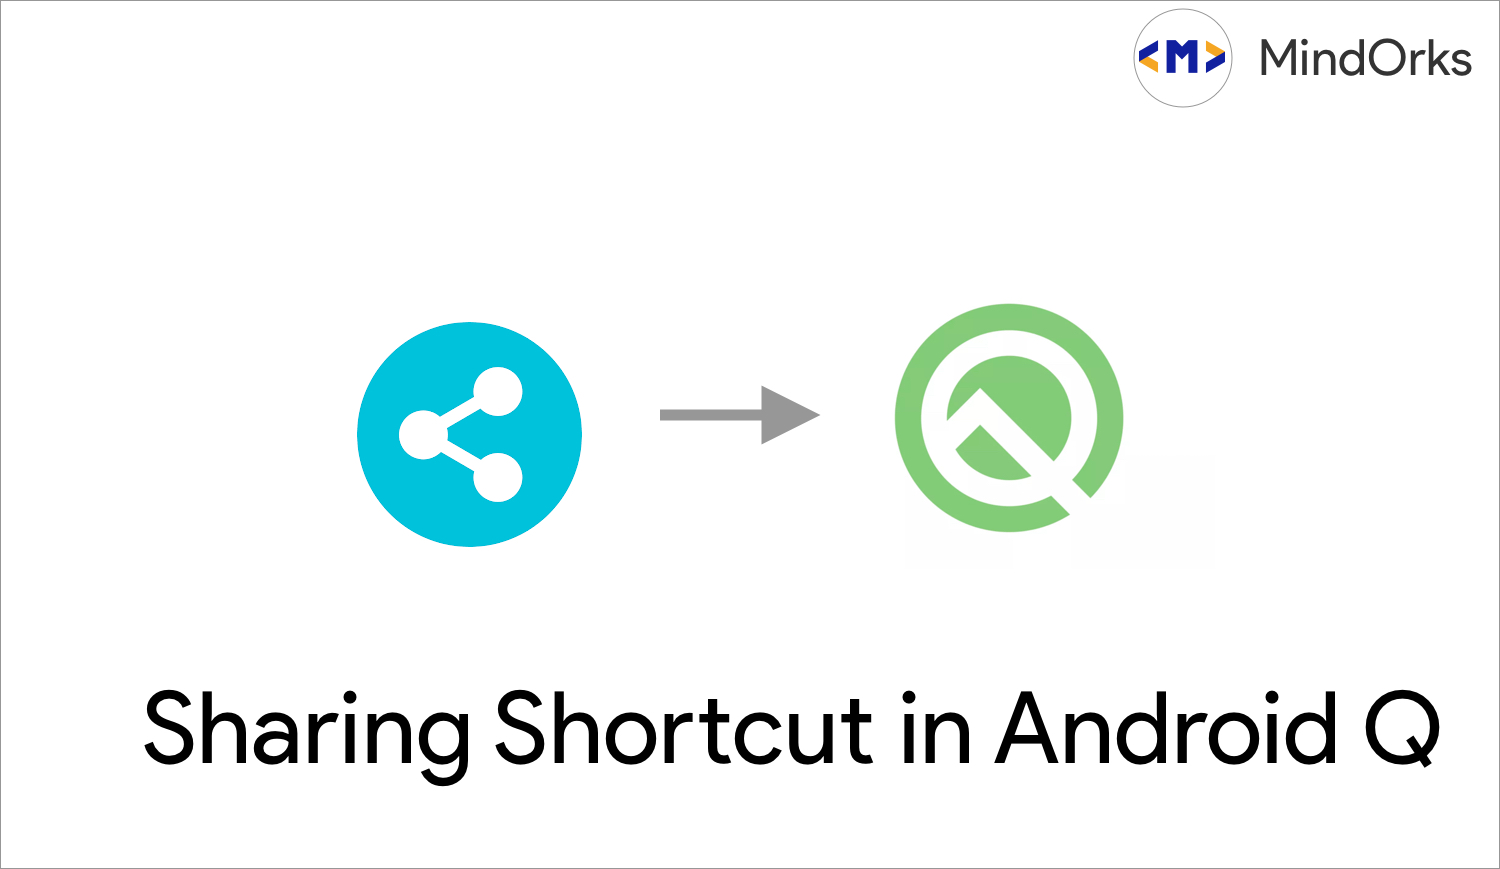 Getting Started with ShareSheet in Android Q